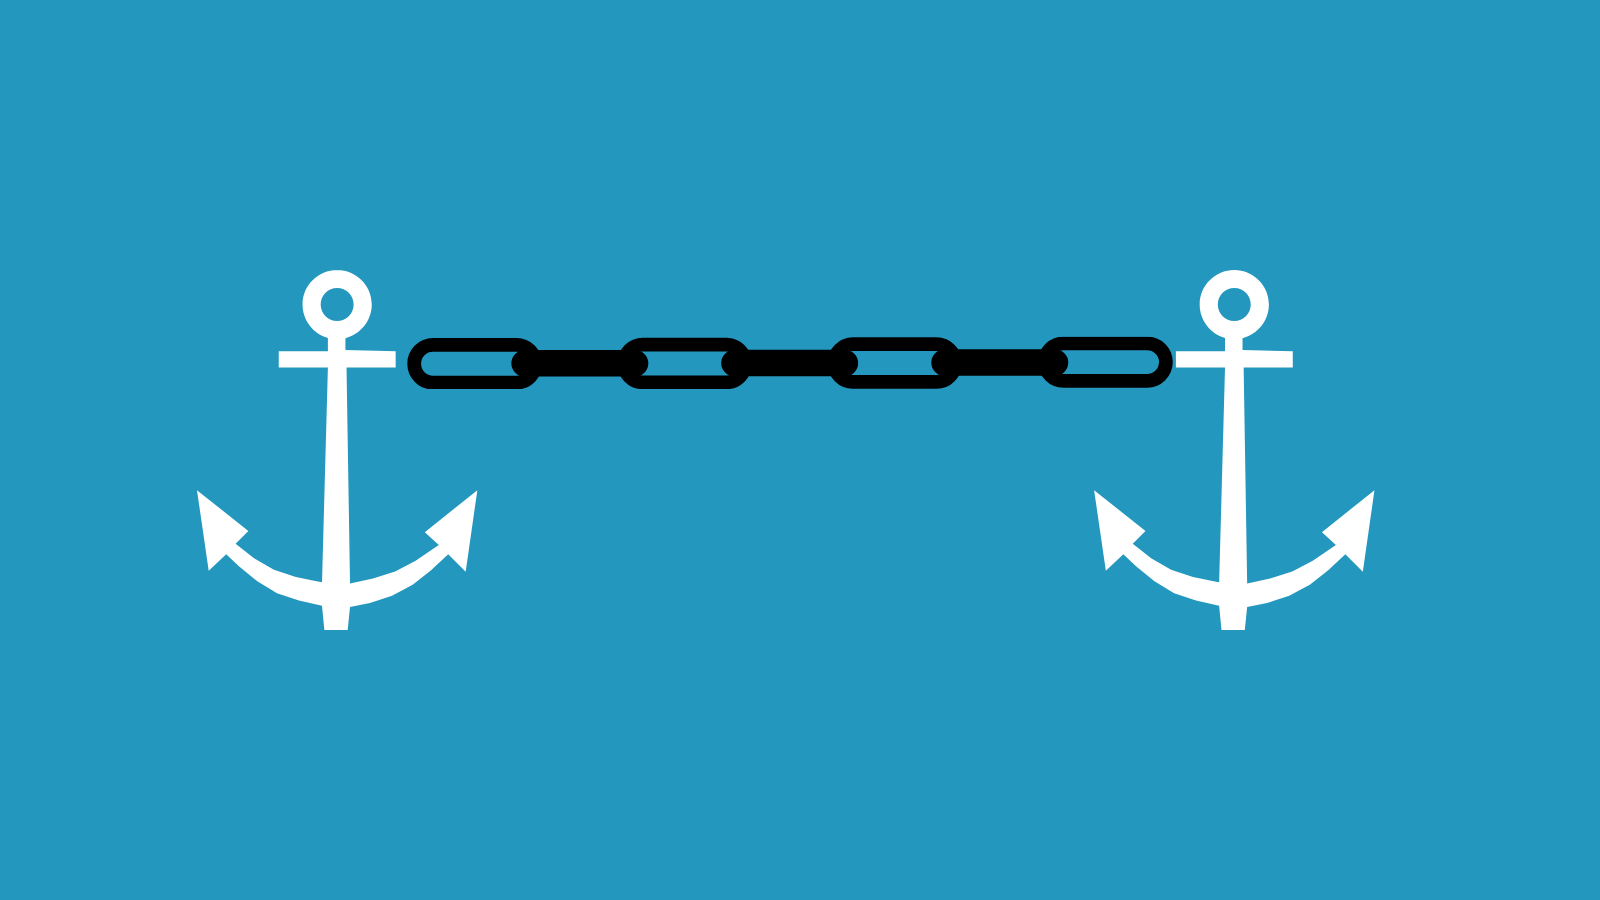 Two anchors connected by a chain